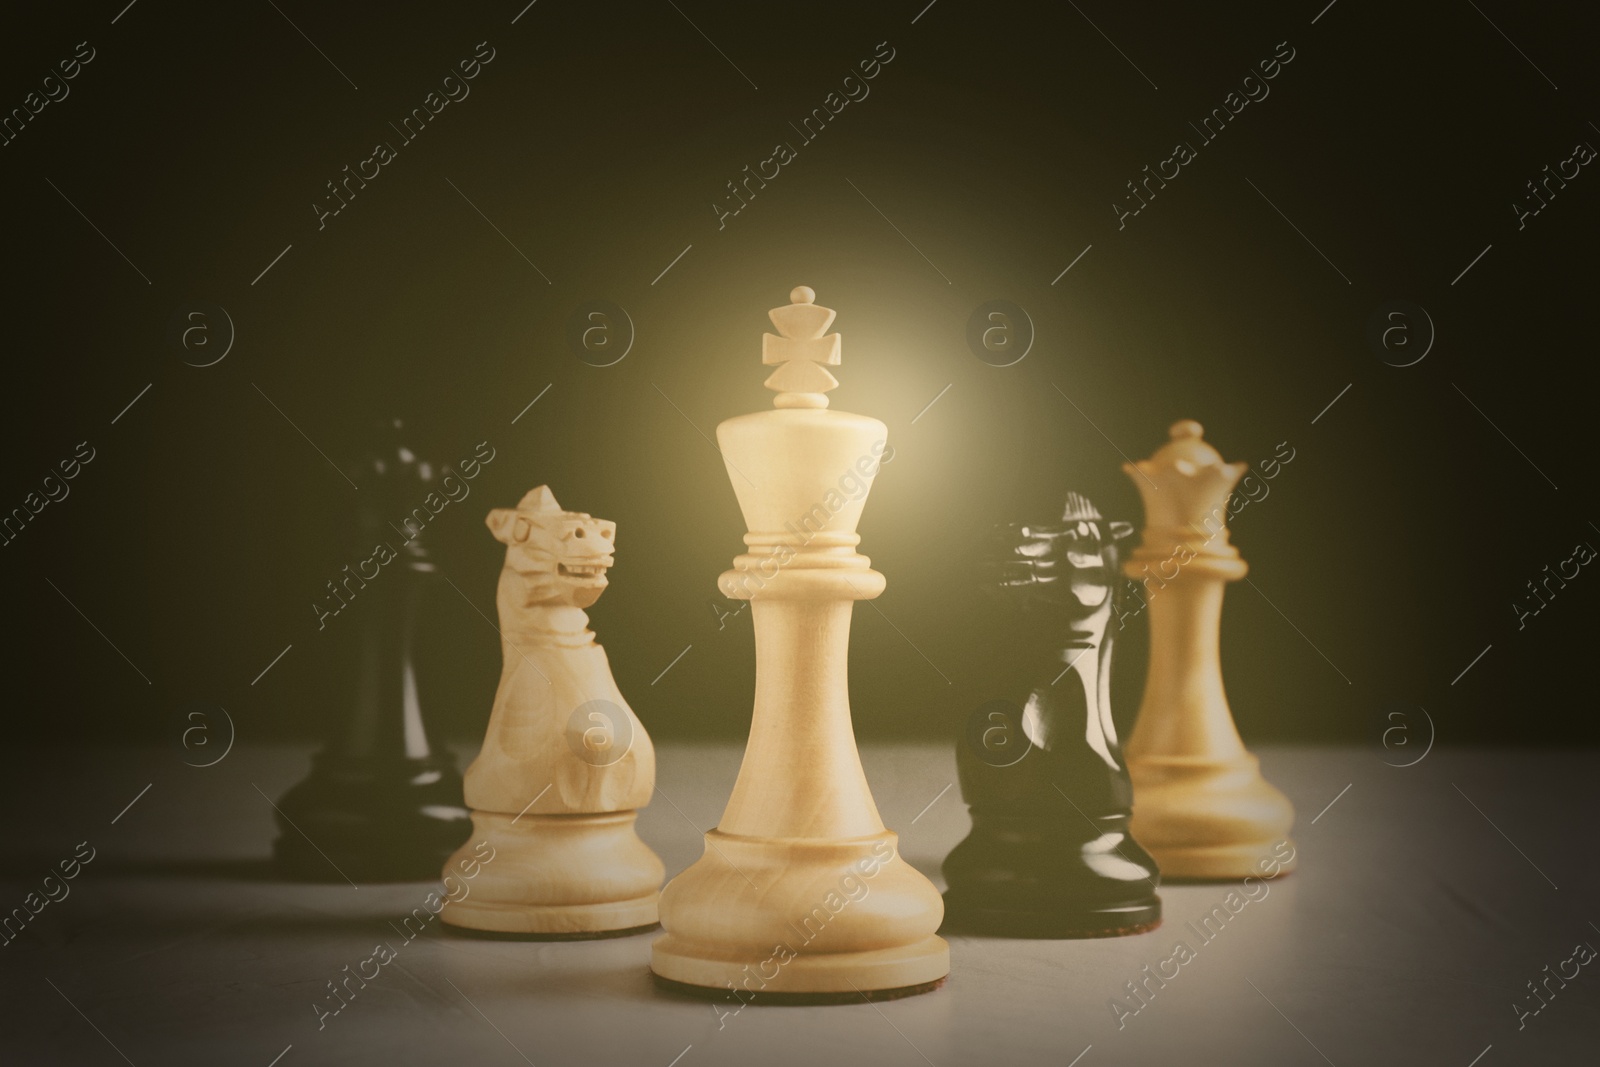 Image of Different chess pieces on grey table against dark background